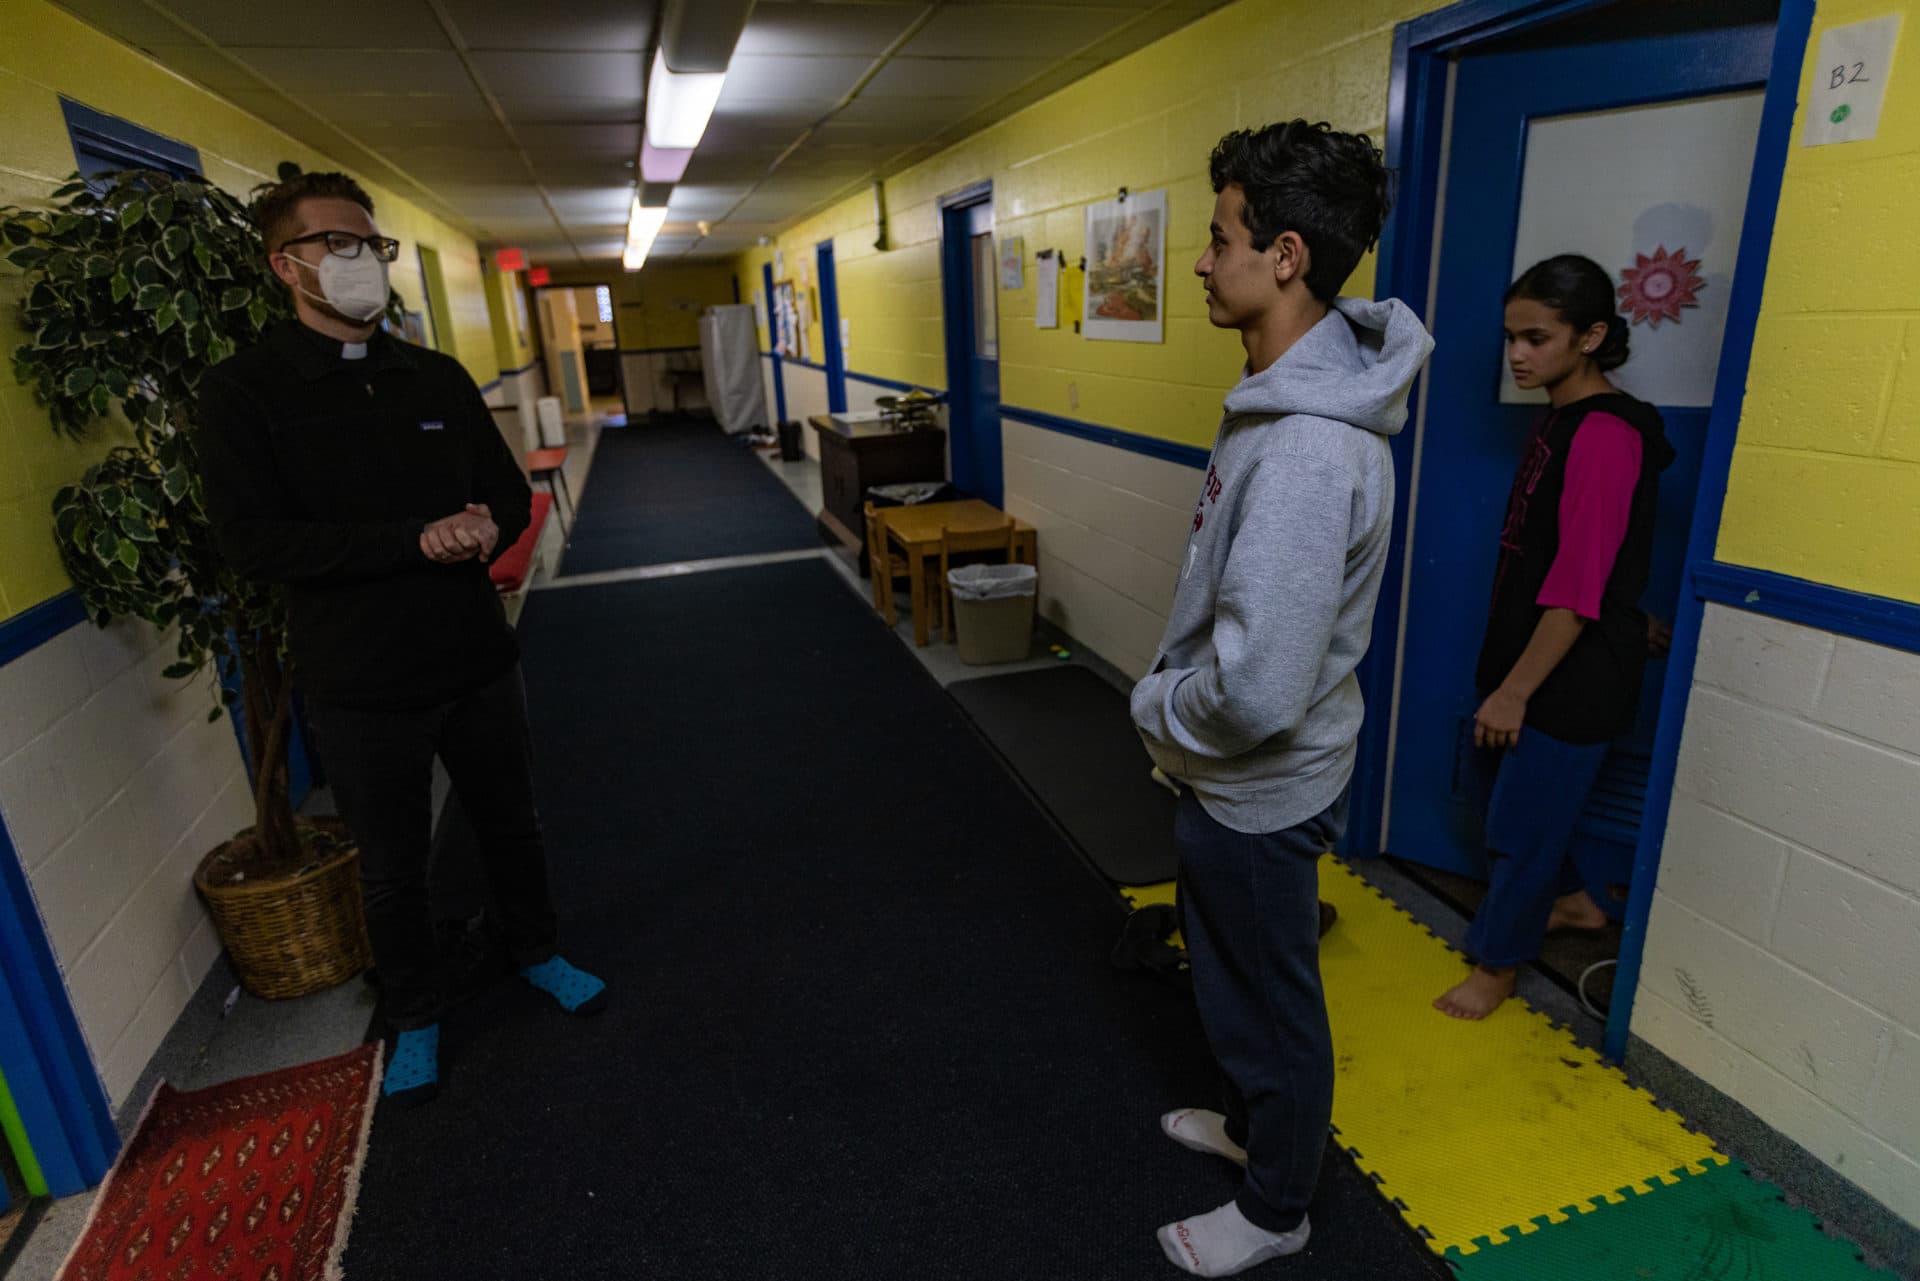 Rev. Jarred Mercer, rector of St. Paul's Episcopal Church in Newburyport, is leading a local effort to find or create housing for the two families of Afghan evacuees that have been staying in the basement of his church for more than a year. (Jesse Costa/WBUR)